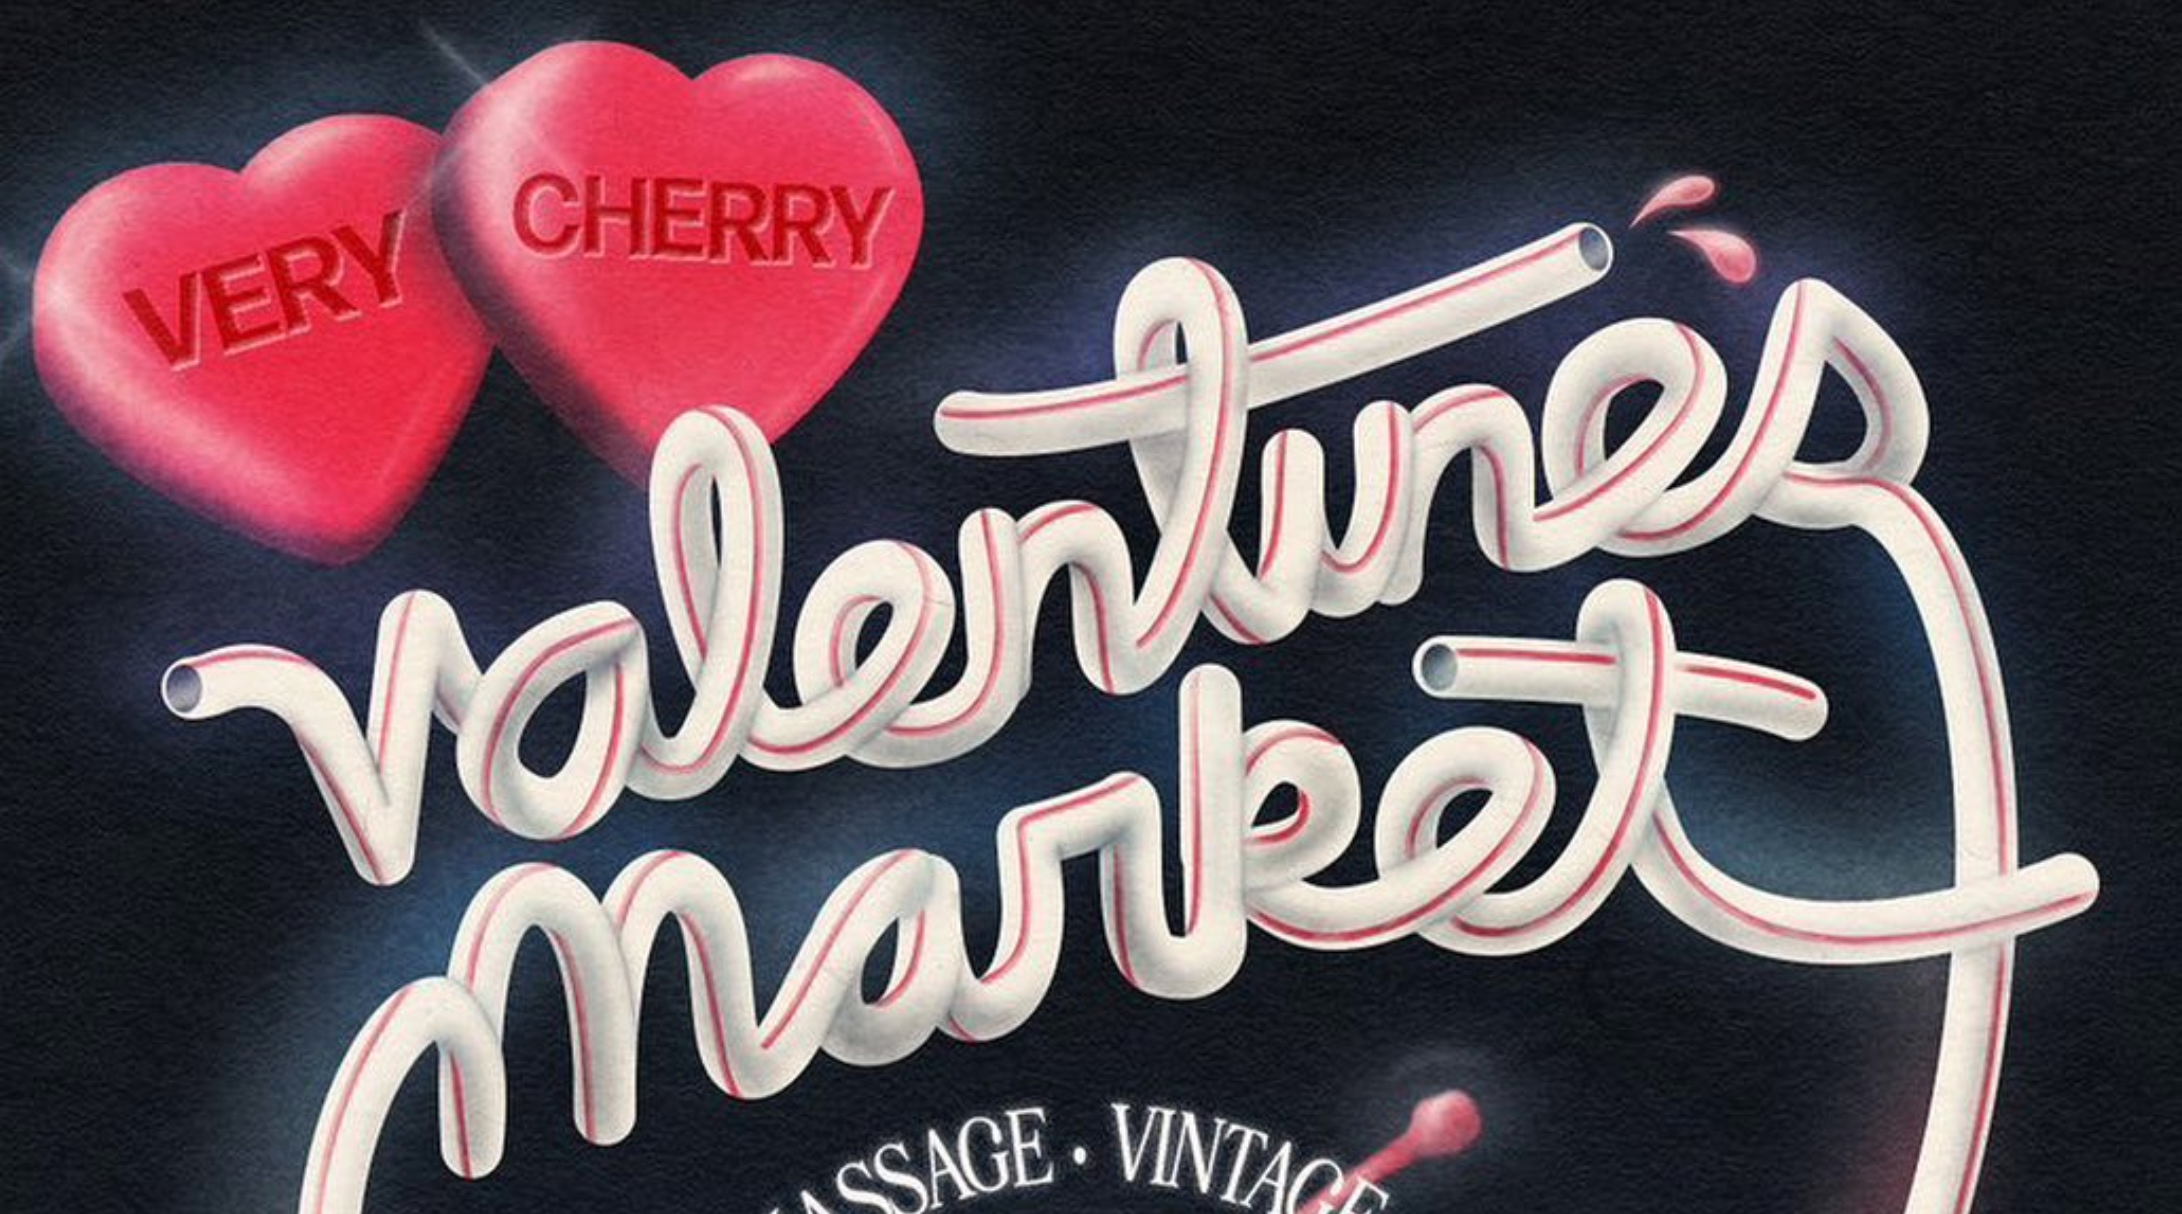 A poster for the Valentine's market at The Cherry Pit